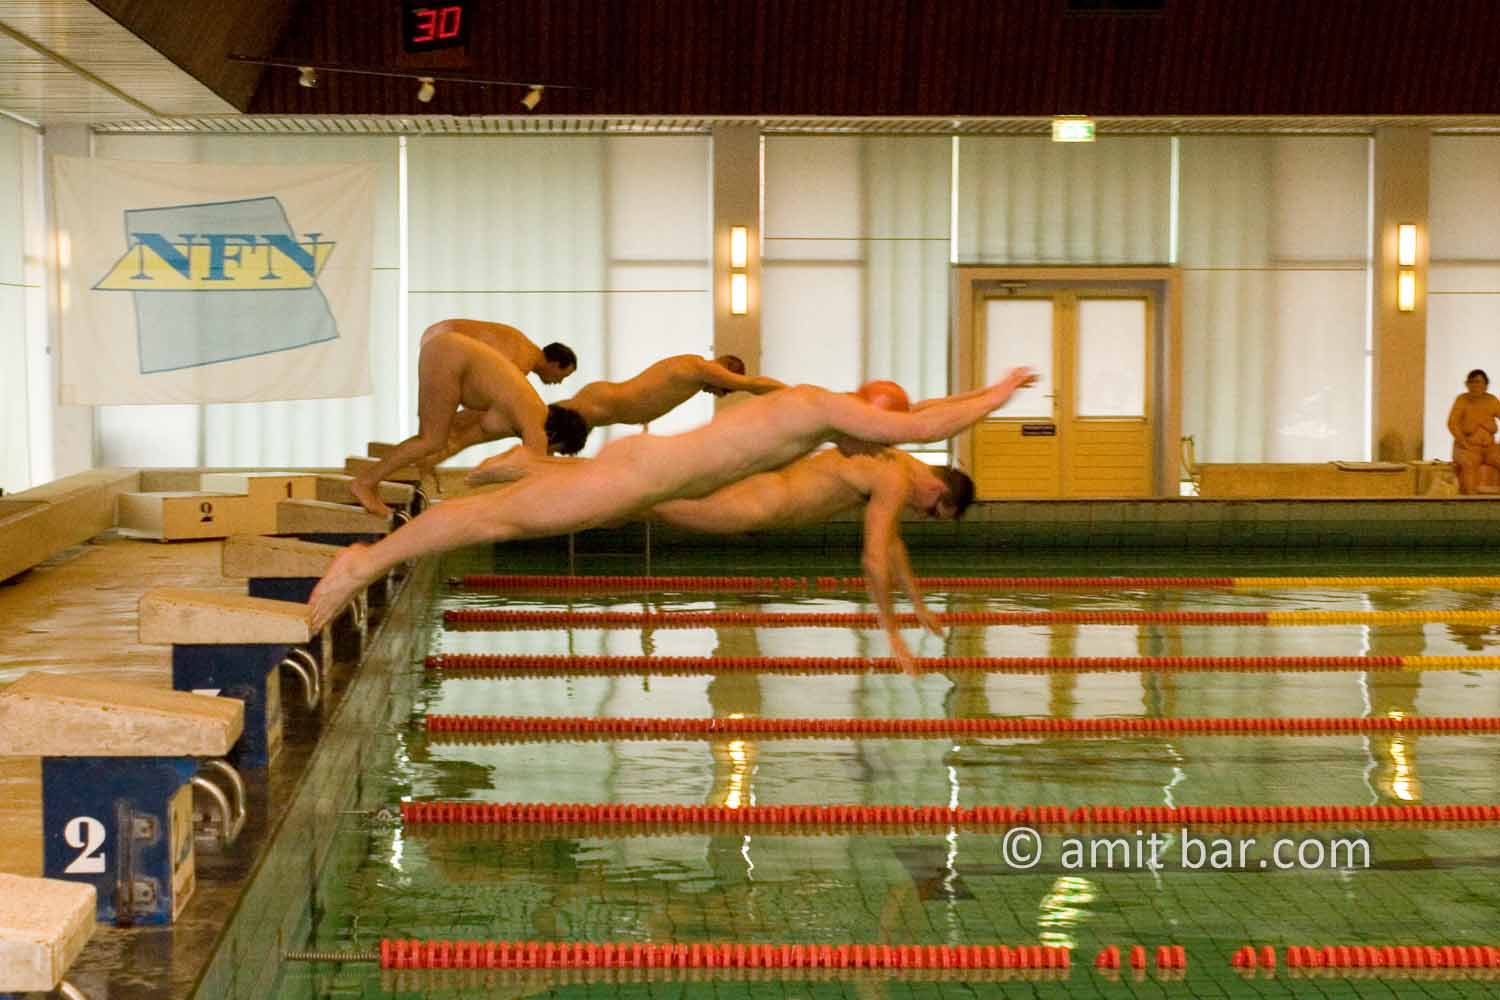 Go!: Swimmers springen on their race at the yearly championship of the Dutch National Federation of Naturiists.